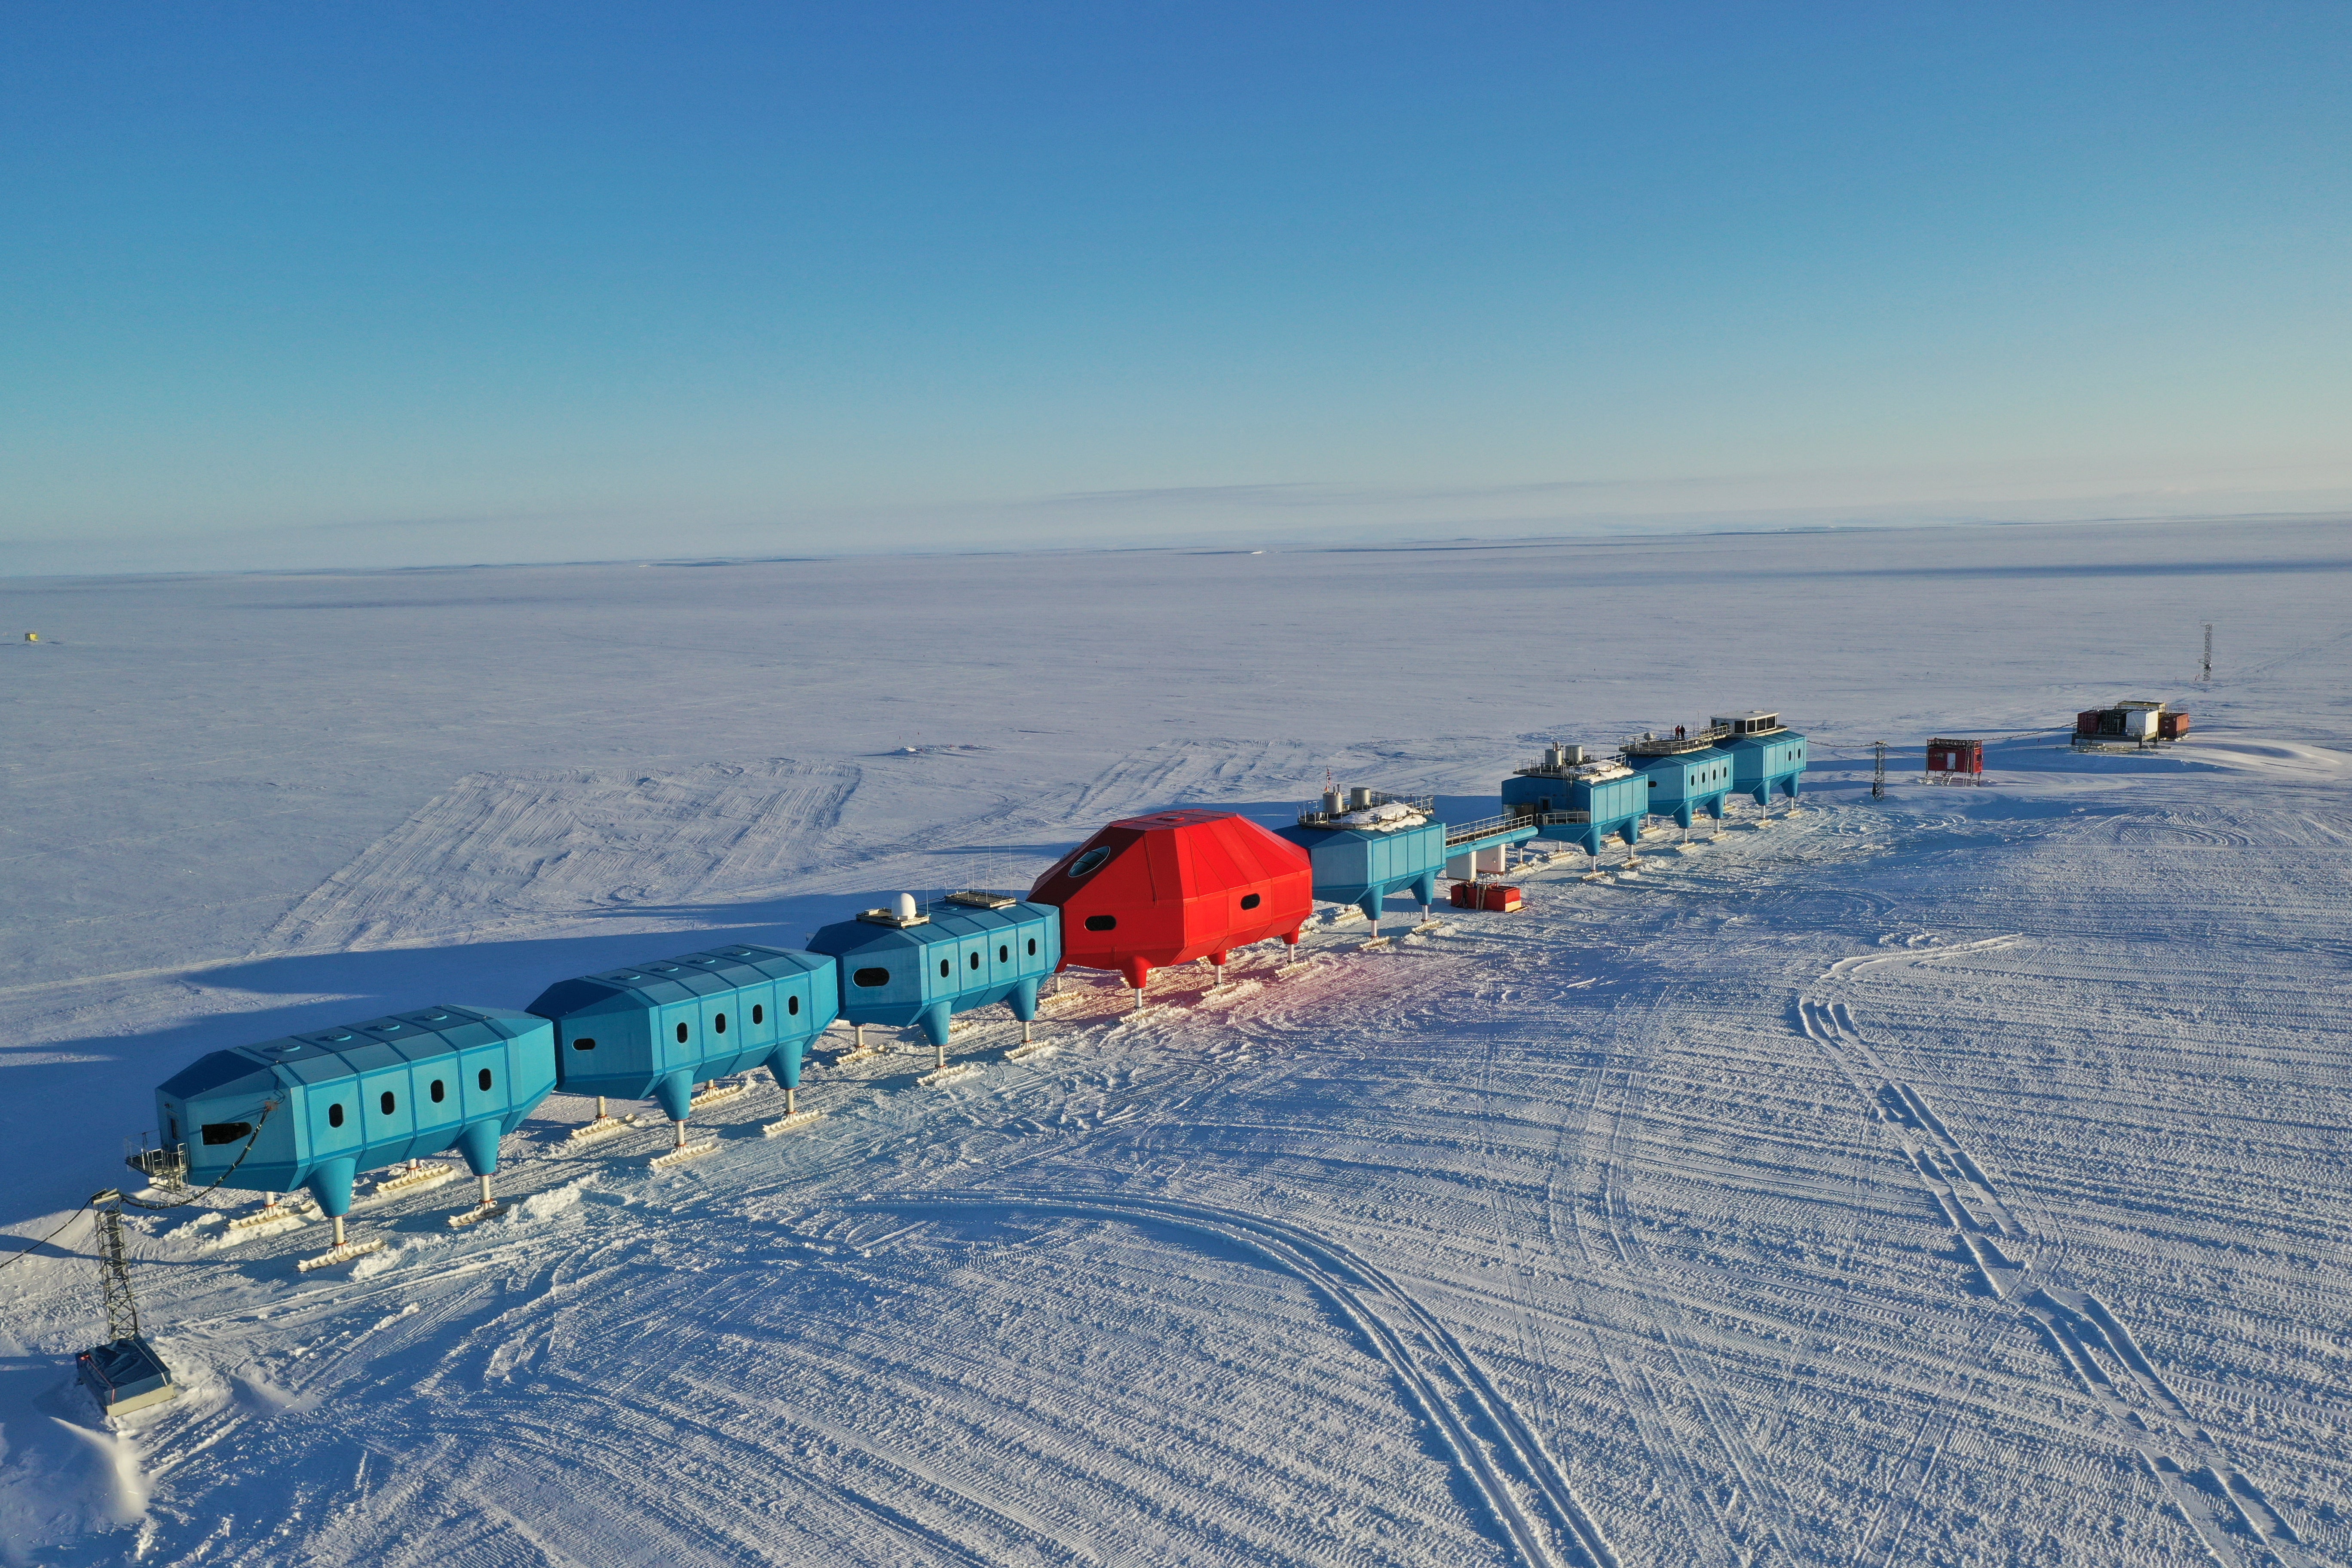 Halley VI Research Station is modular and built on skis, so the base can be easily separated into parts and moved as needed. If further calving occurs on the Brunt Ice Shelf, the station may well be relocated again.  (Photo: British Antarctic Survey)